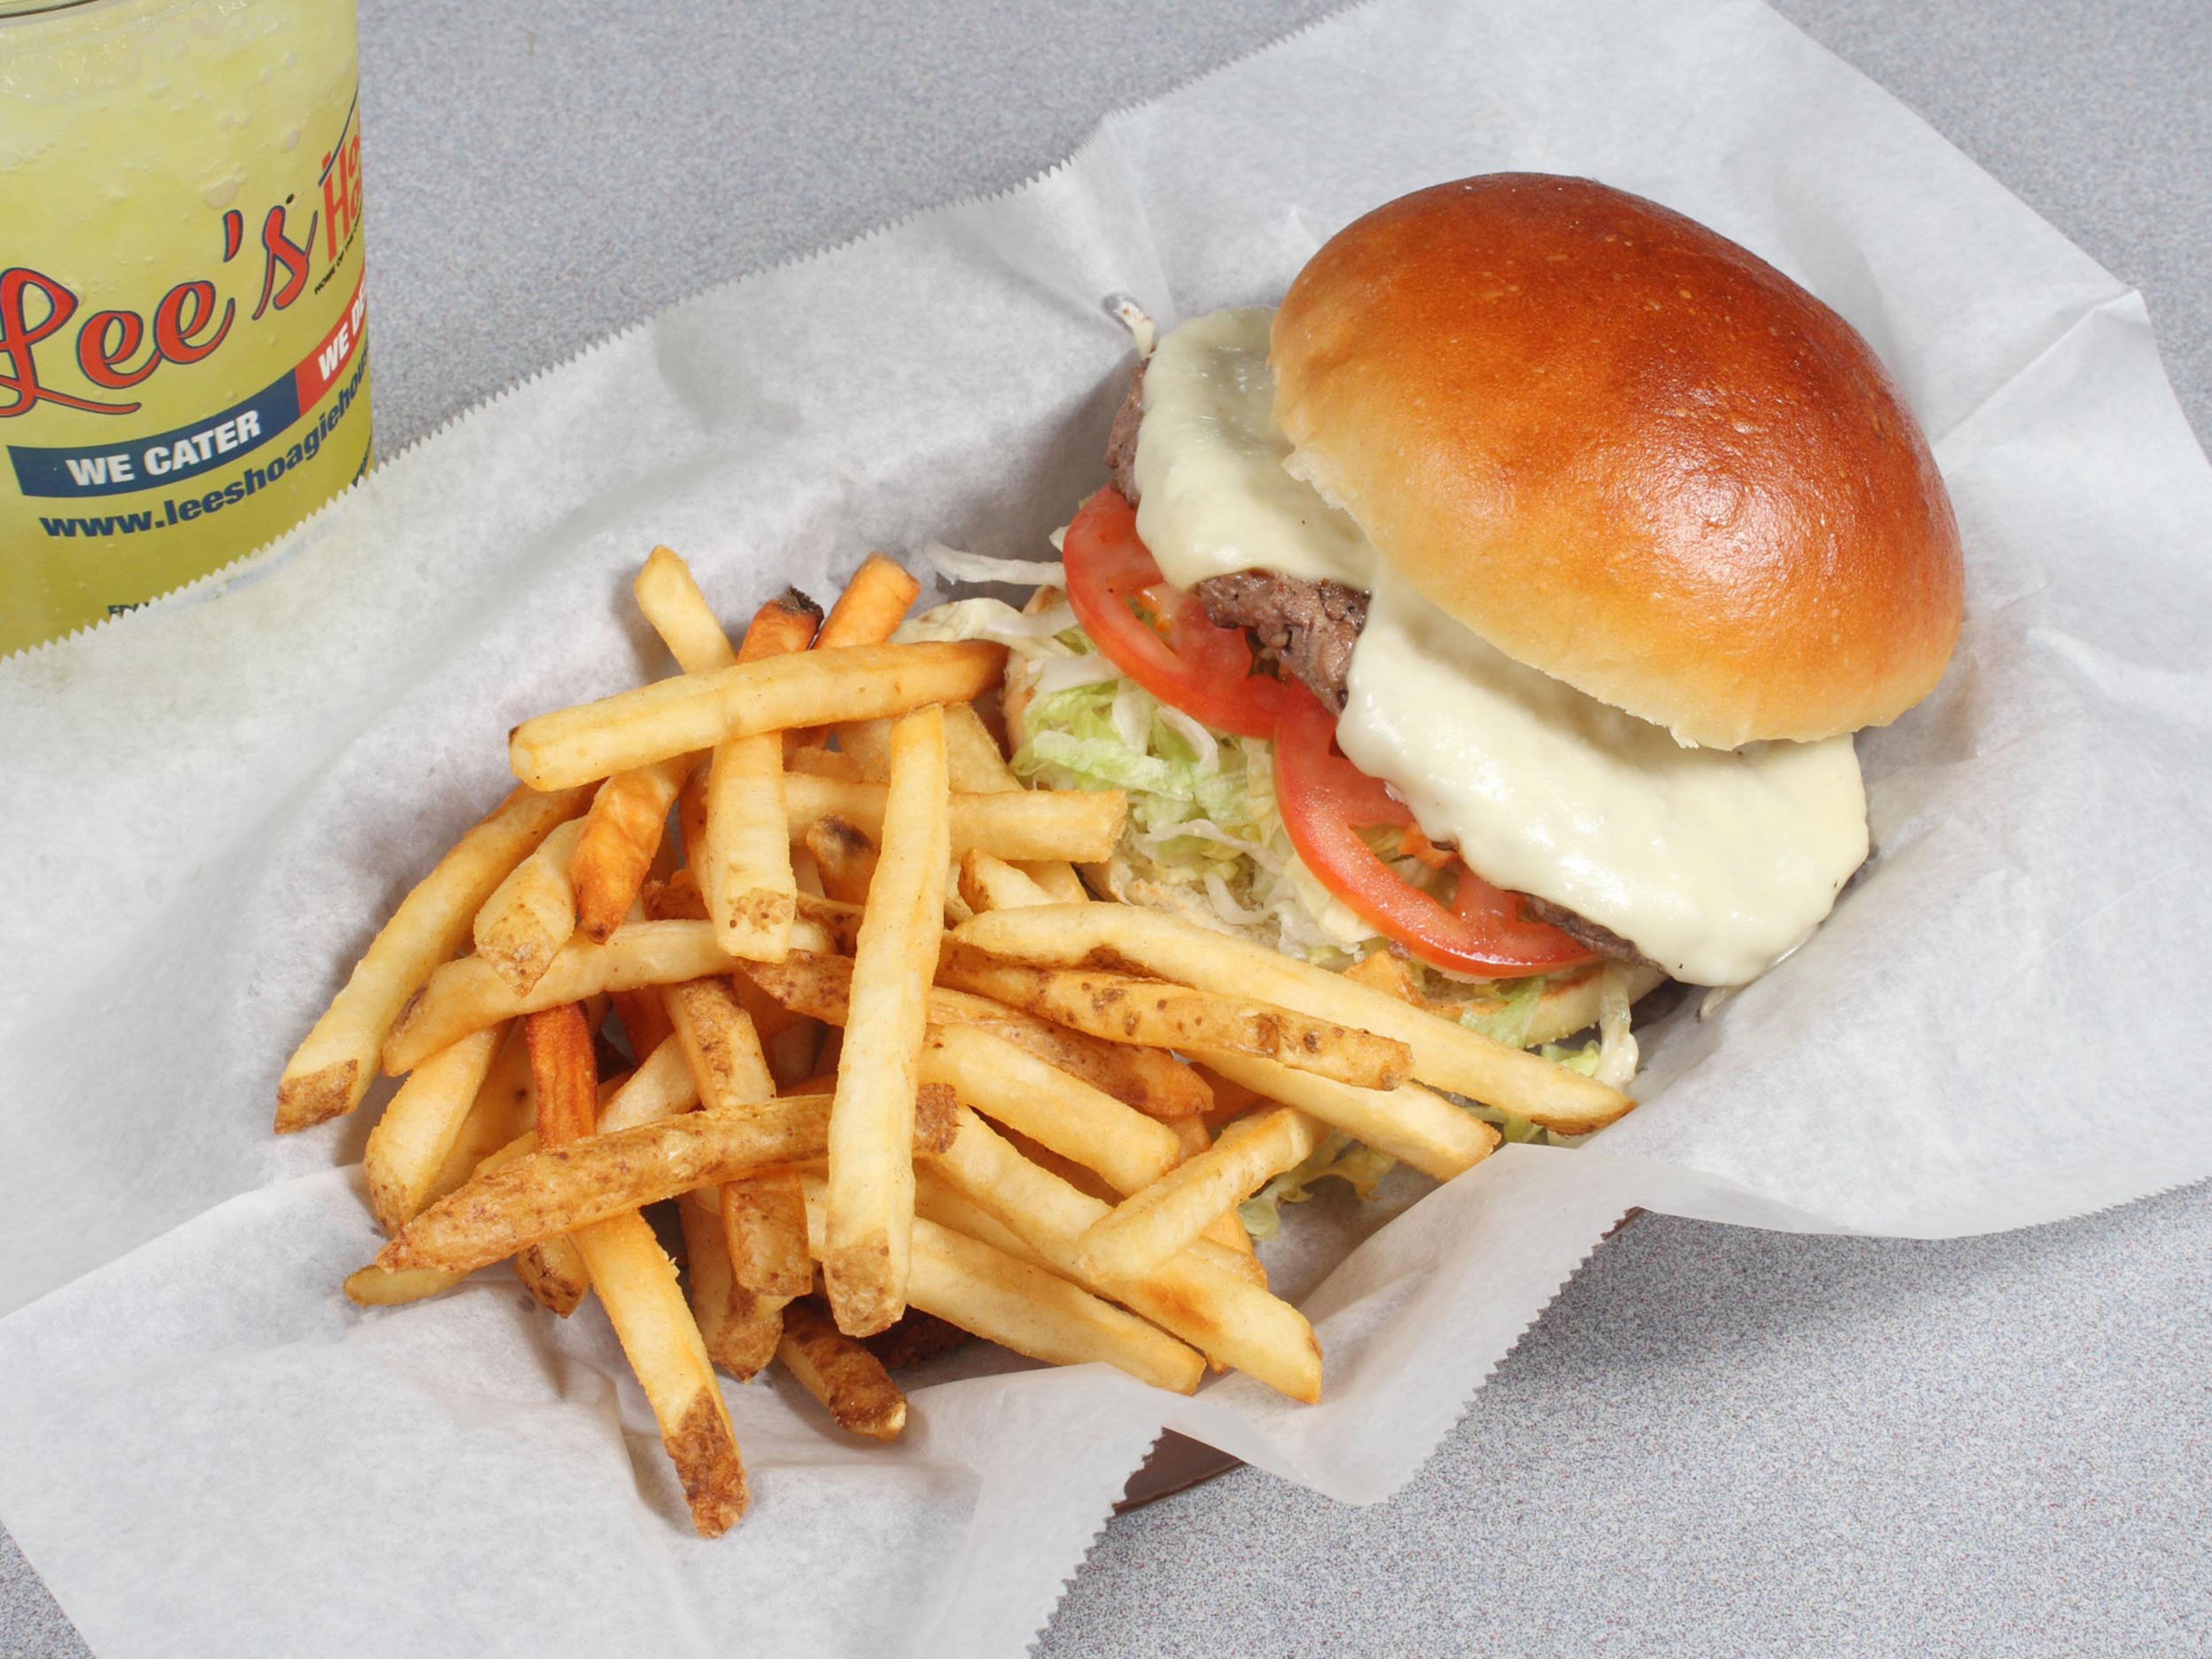 6 oz Burger and fries and a drink combo. Build your own burger